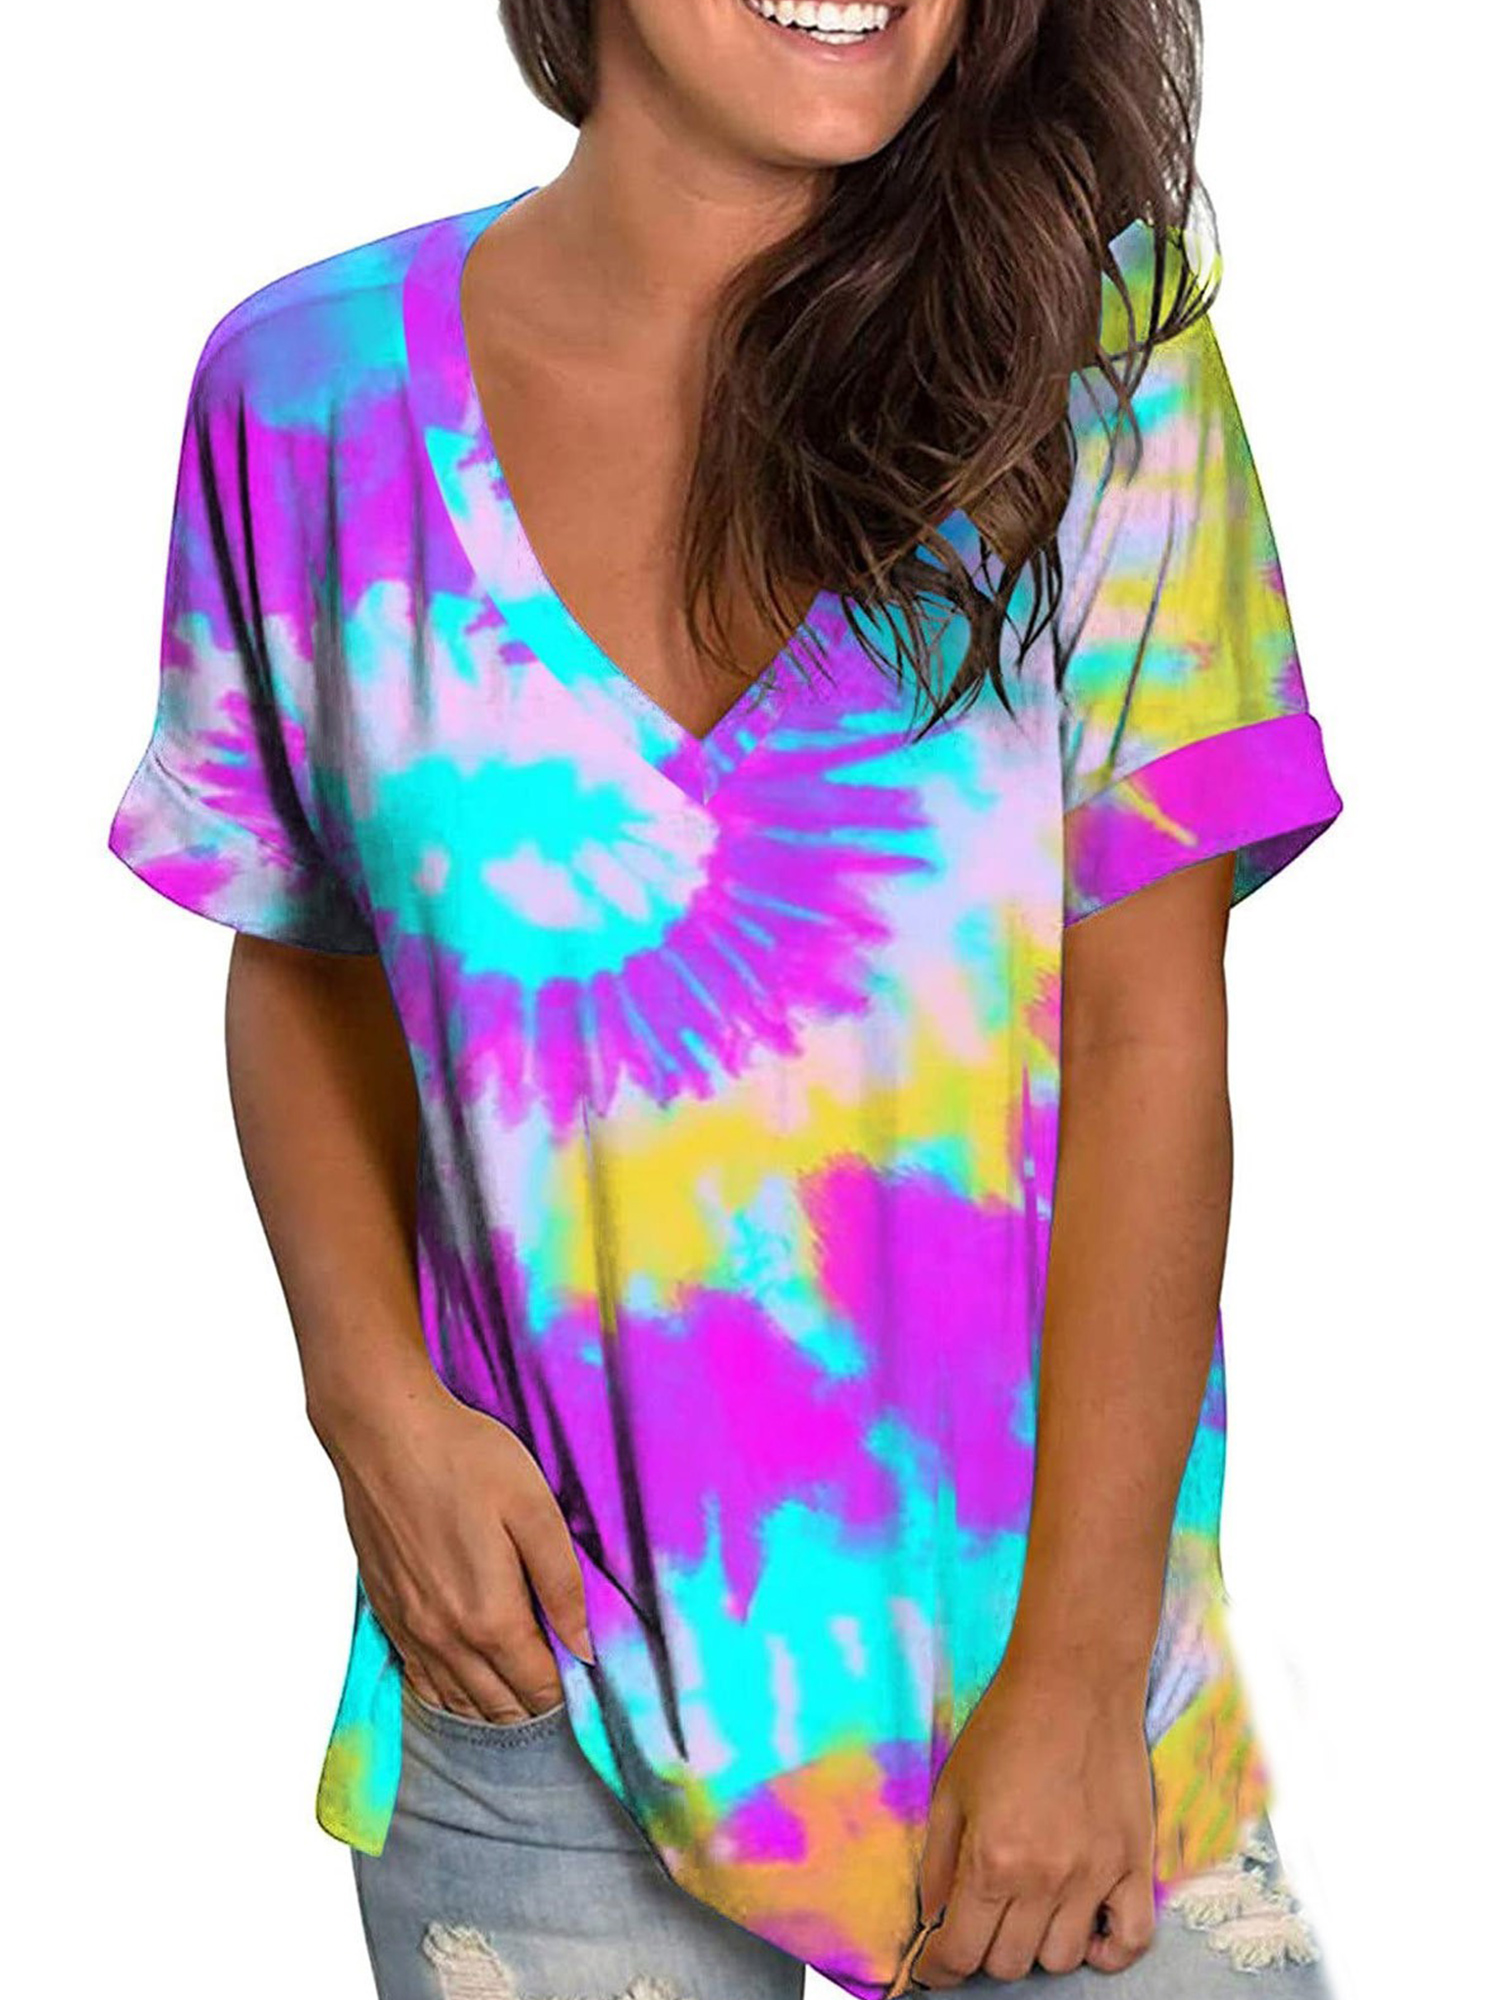 Shirts Tops for Women,Womens Colorful Tie Dye Short Sleeve T-Shirt V Neck Graphic Printed Tee Casual Summer Tops